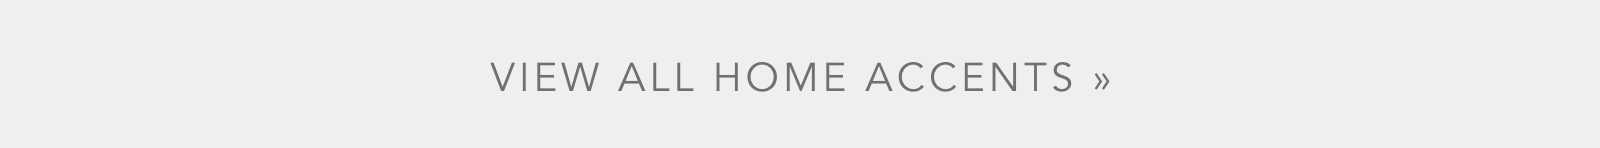 View All Home Accents